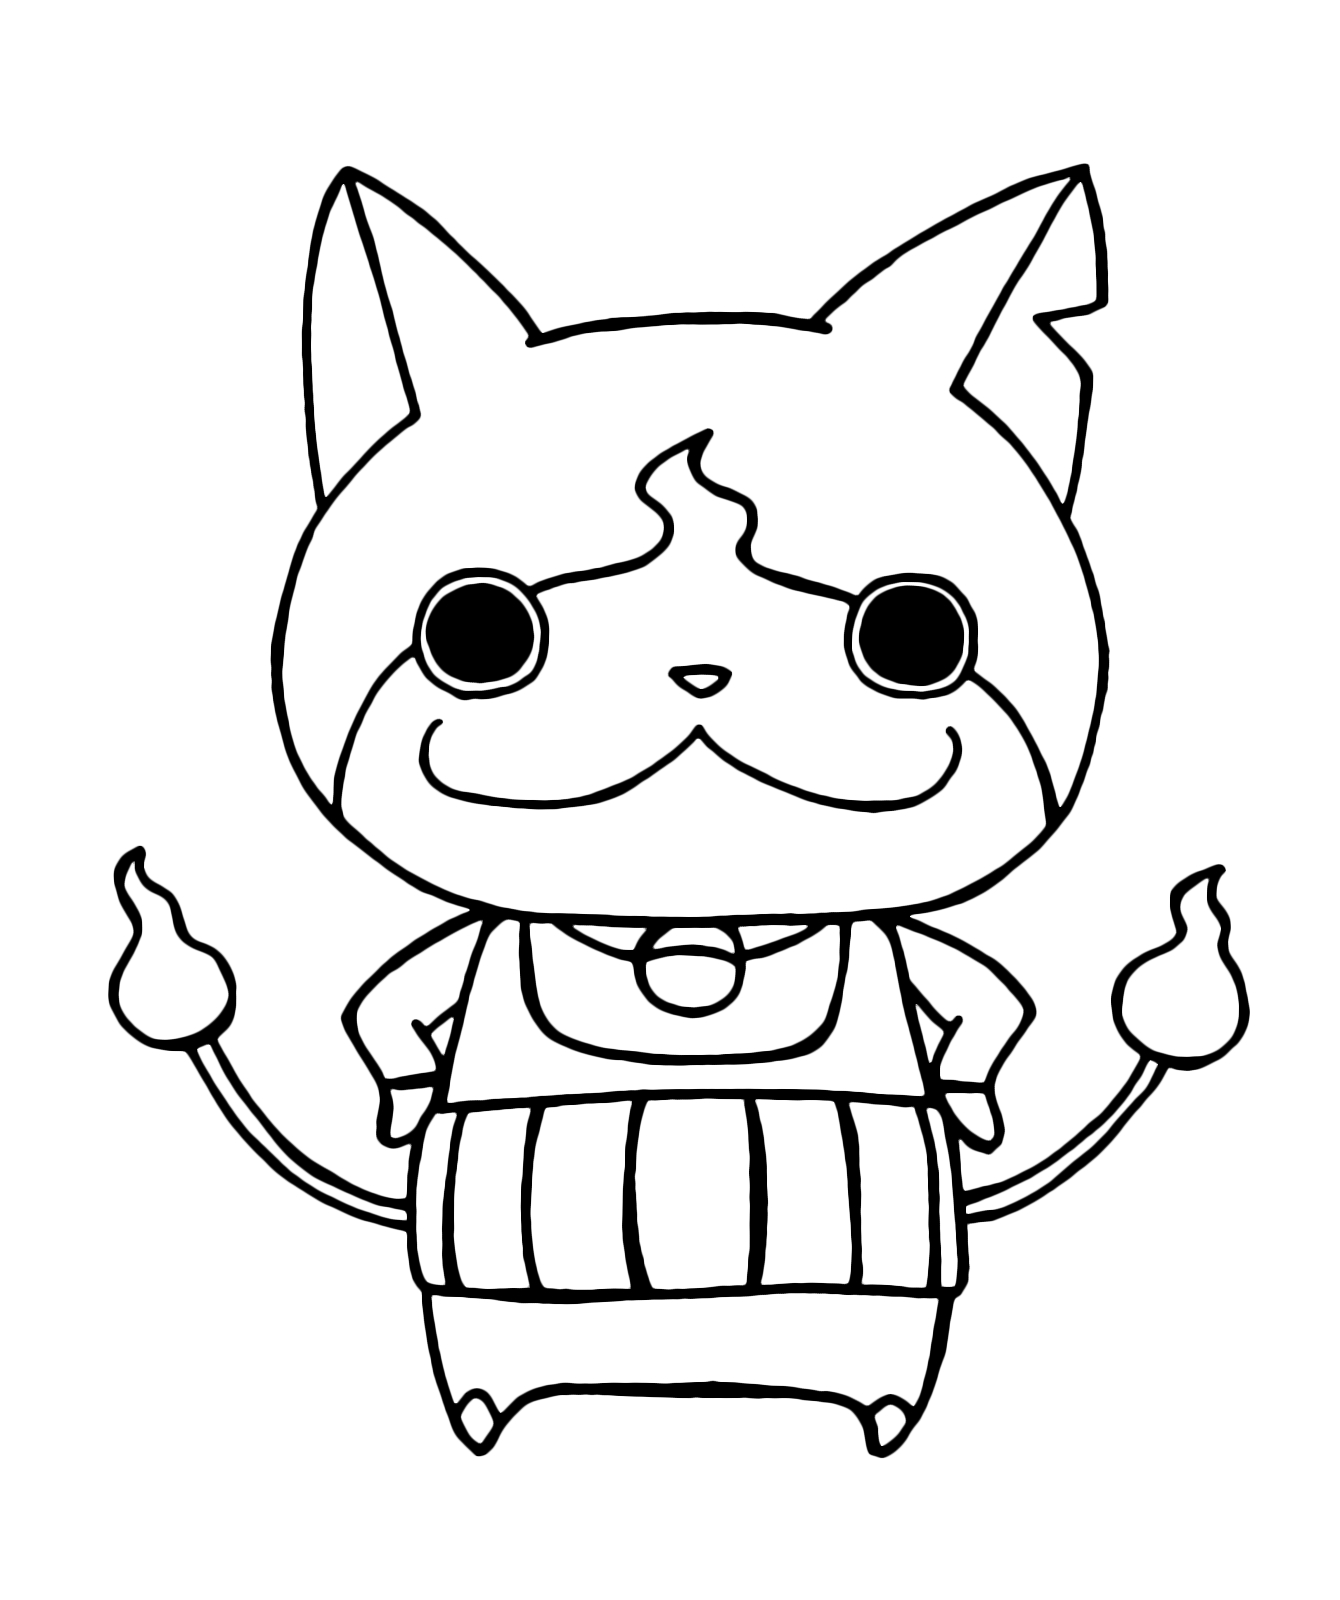 Youkai Watch Coloring Pages at GetColorings.com | Free ...